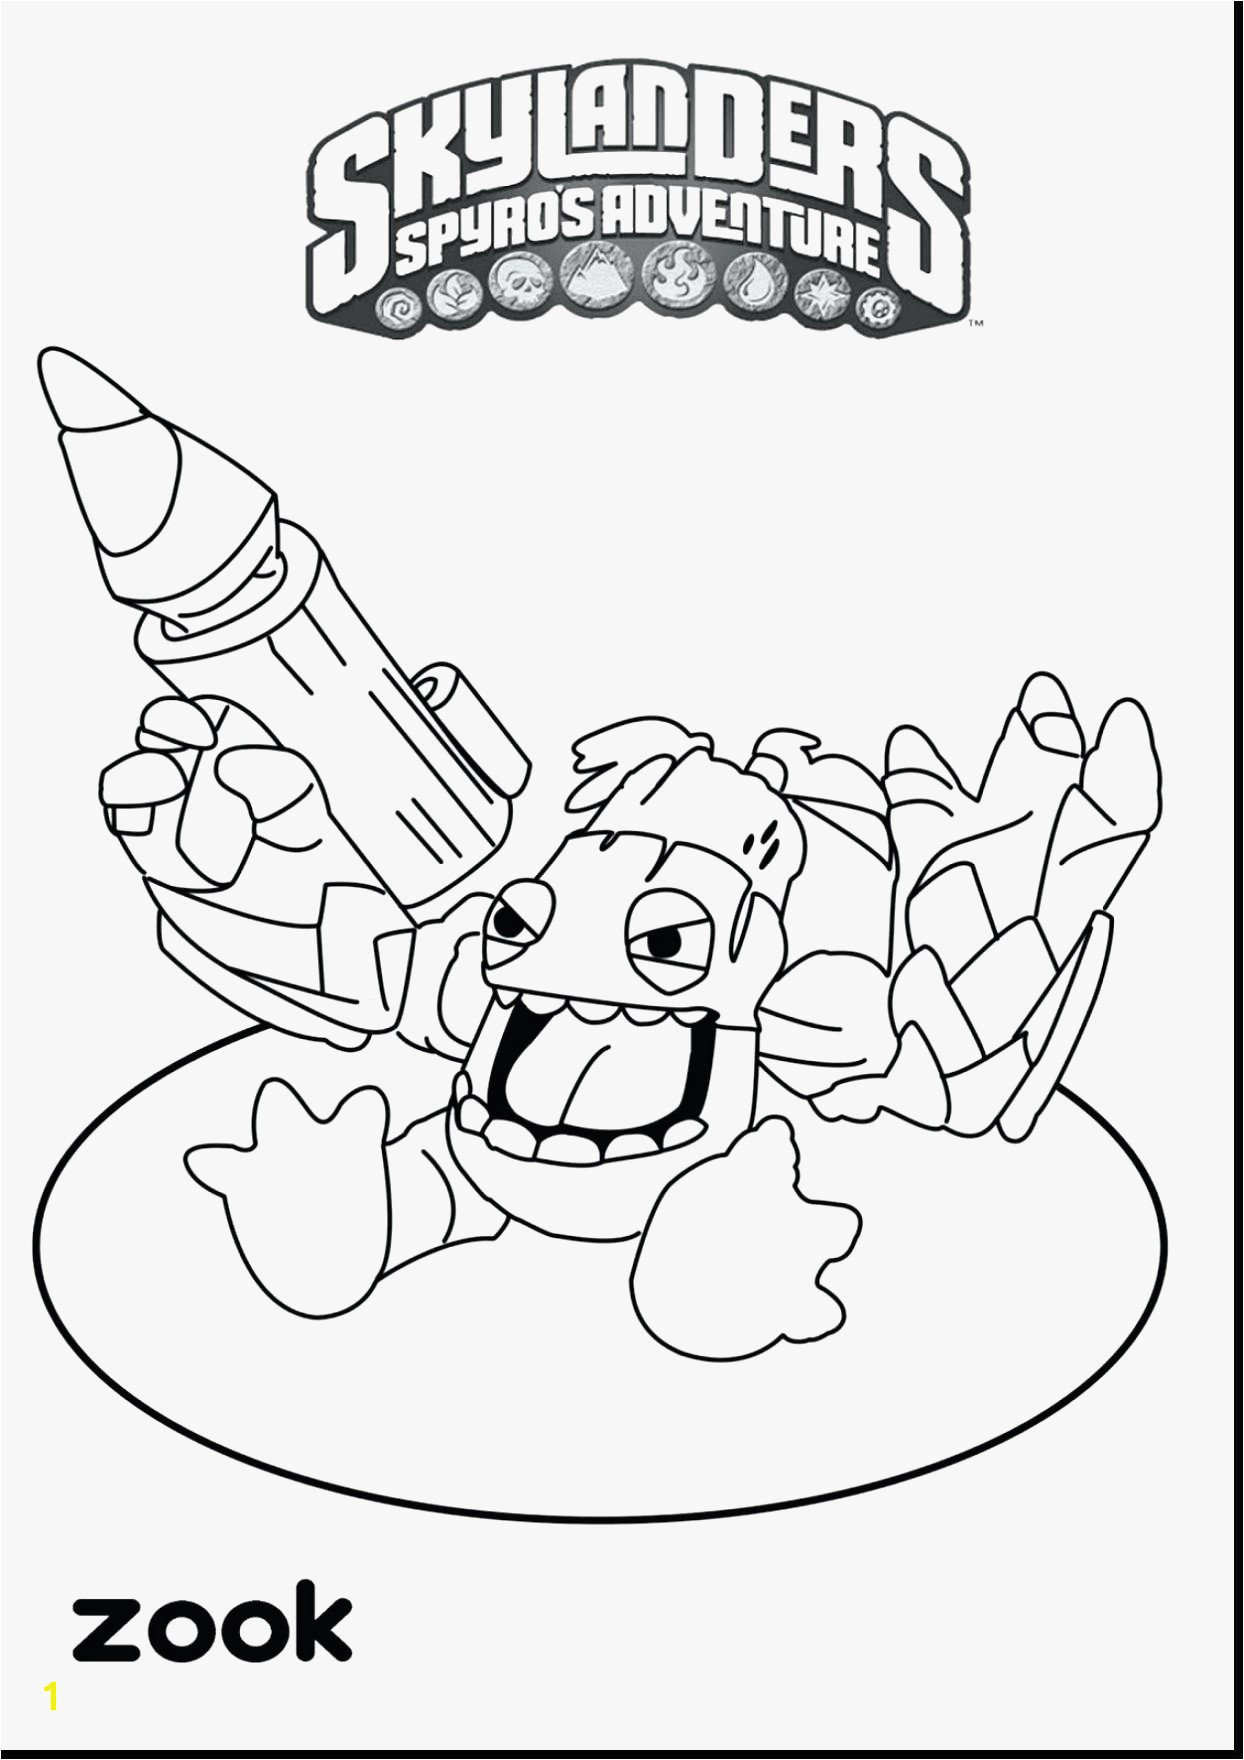 Russell Westbrook Coloring Page 18 Inspirational Russell Westbrook Coloring Pages Pexels